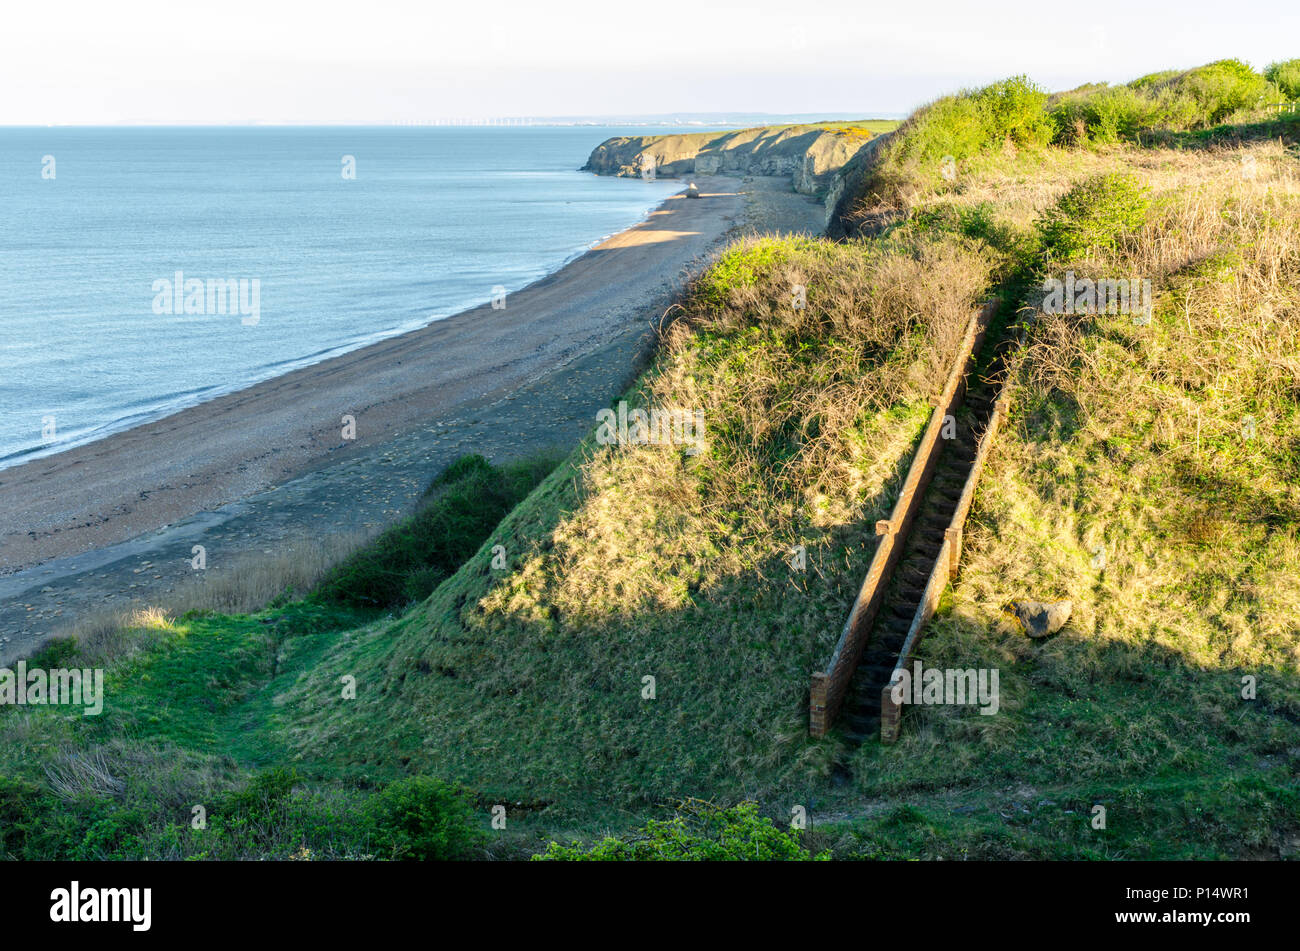 Old Cliffside Stairway at Nose's Point, Seaham, County Durham Stock Photo